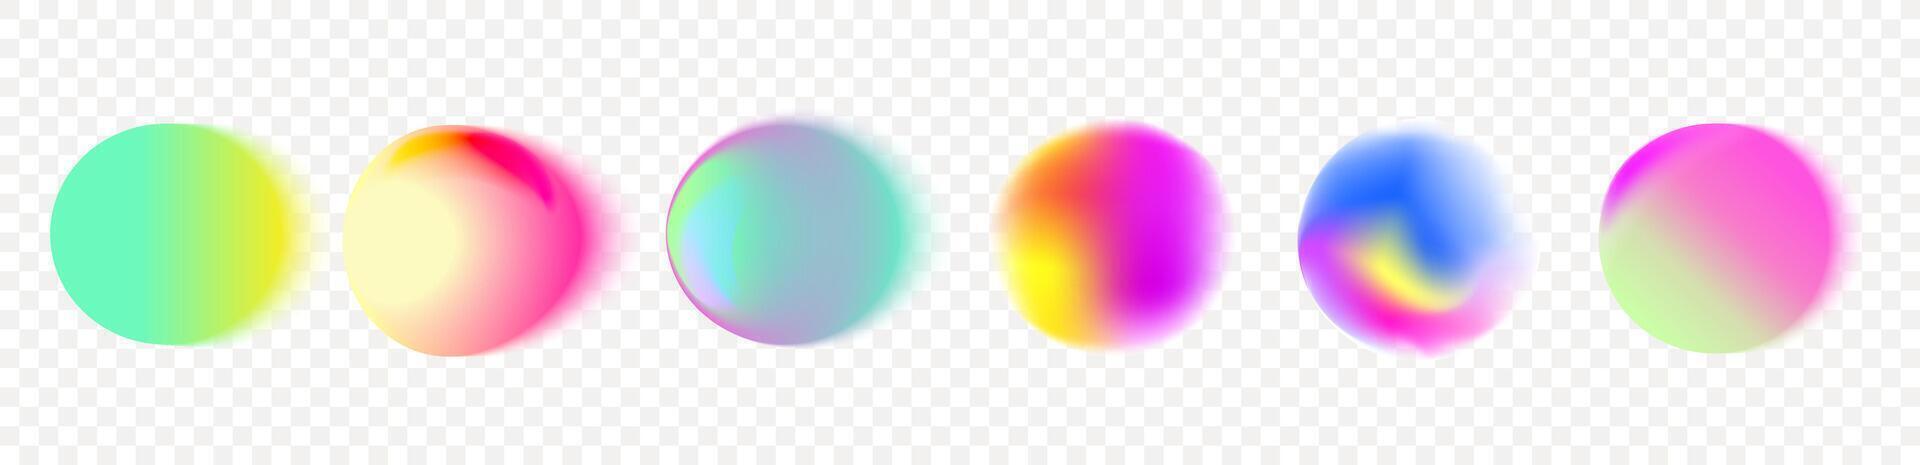 Set of vector illustration featuring an abstract radial gradient blur in shades of purple,green and  blue.Vibrant set of aura glow rounds with a soft  dot neon element.Color holographic round shapes.